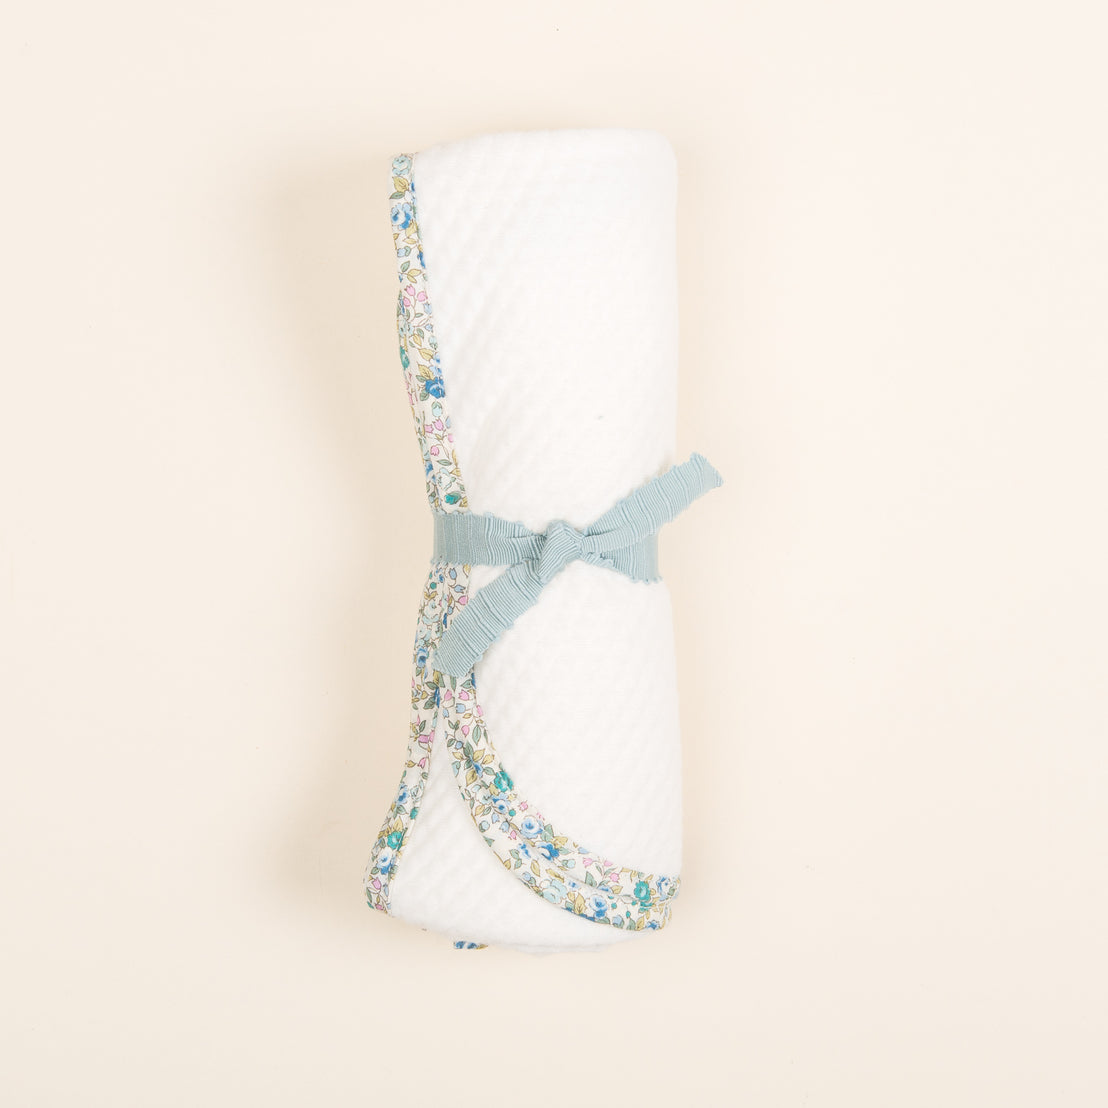 A rolled Petite Fleur Personalized Blanket tied with a light blue ribbon and accented with a floral fabric trim against a pale beige background, featuring Vintage-inspired details.